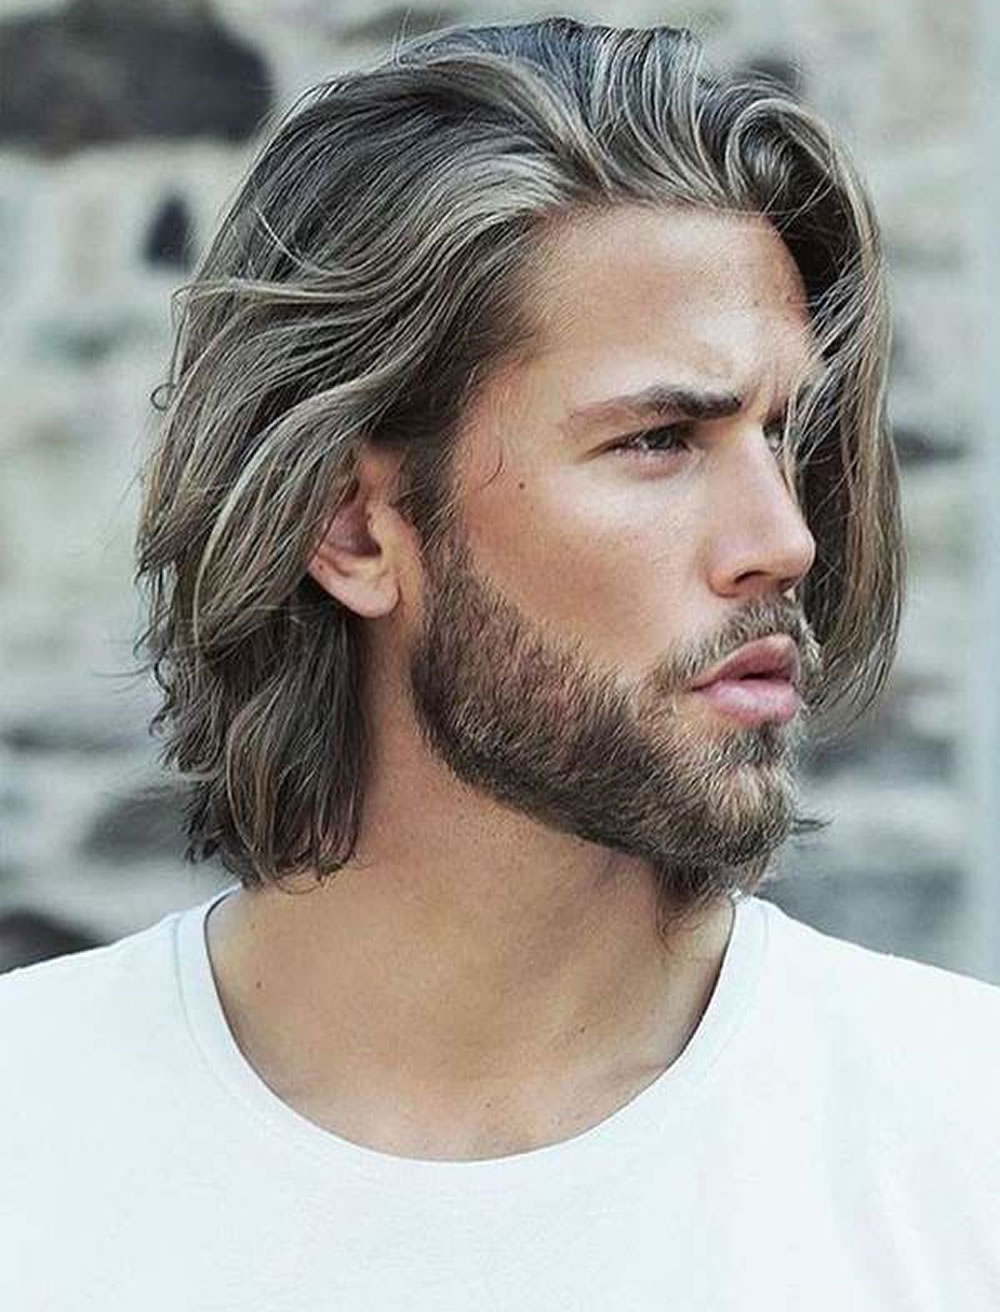 Hairstyles for Men 2018 – Best Haircut Ideas for Guys